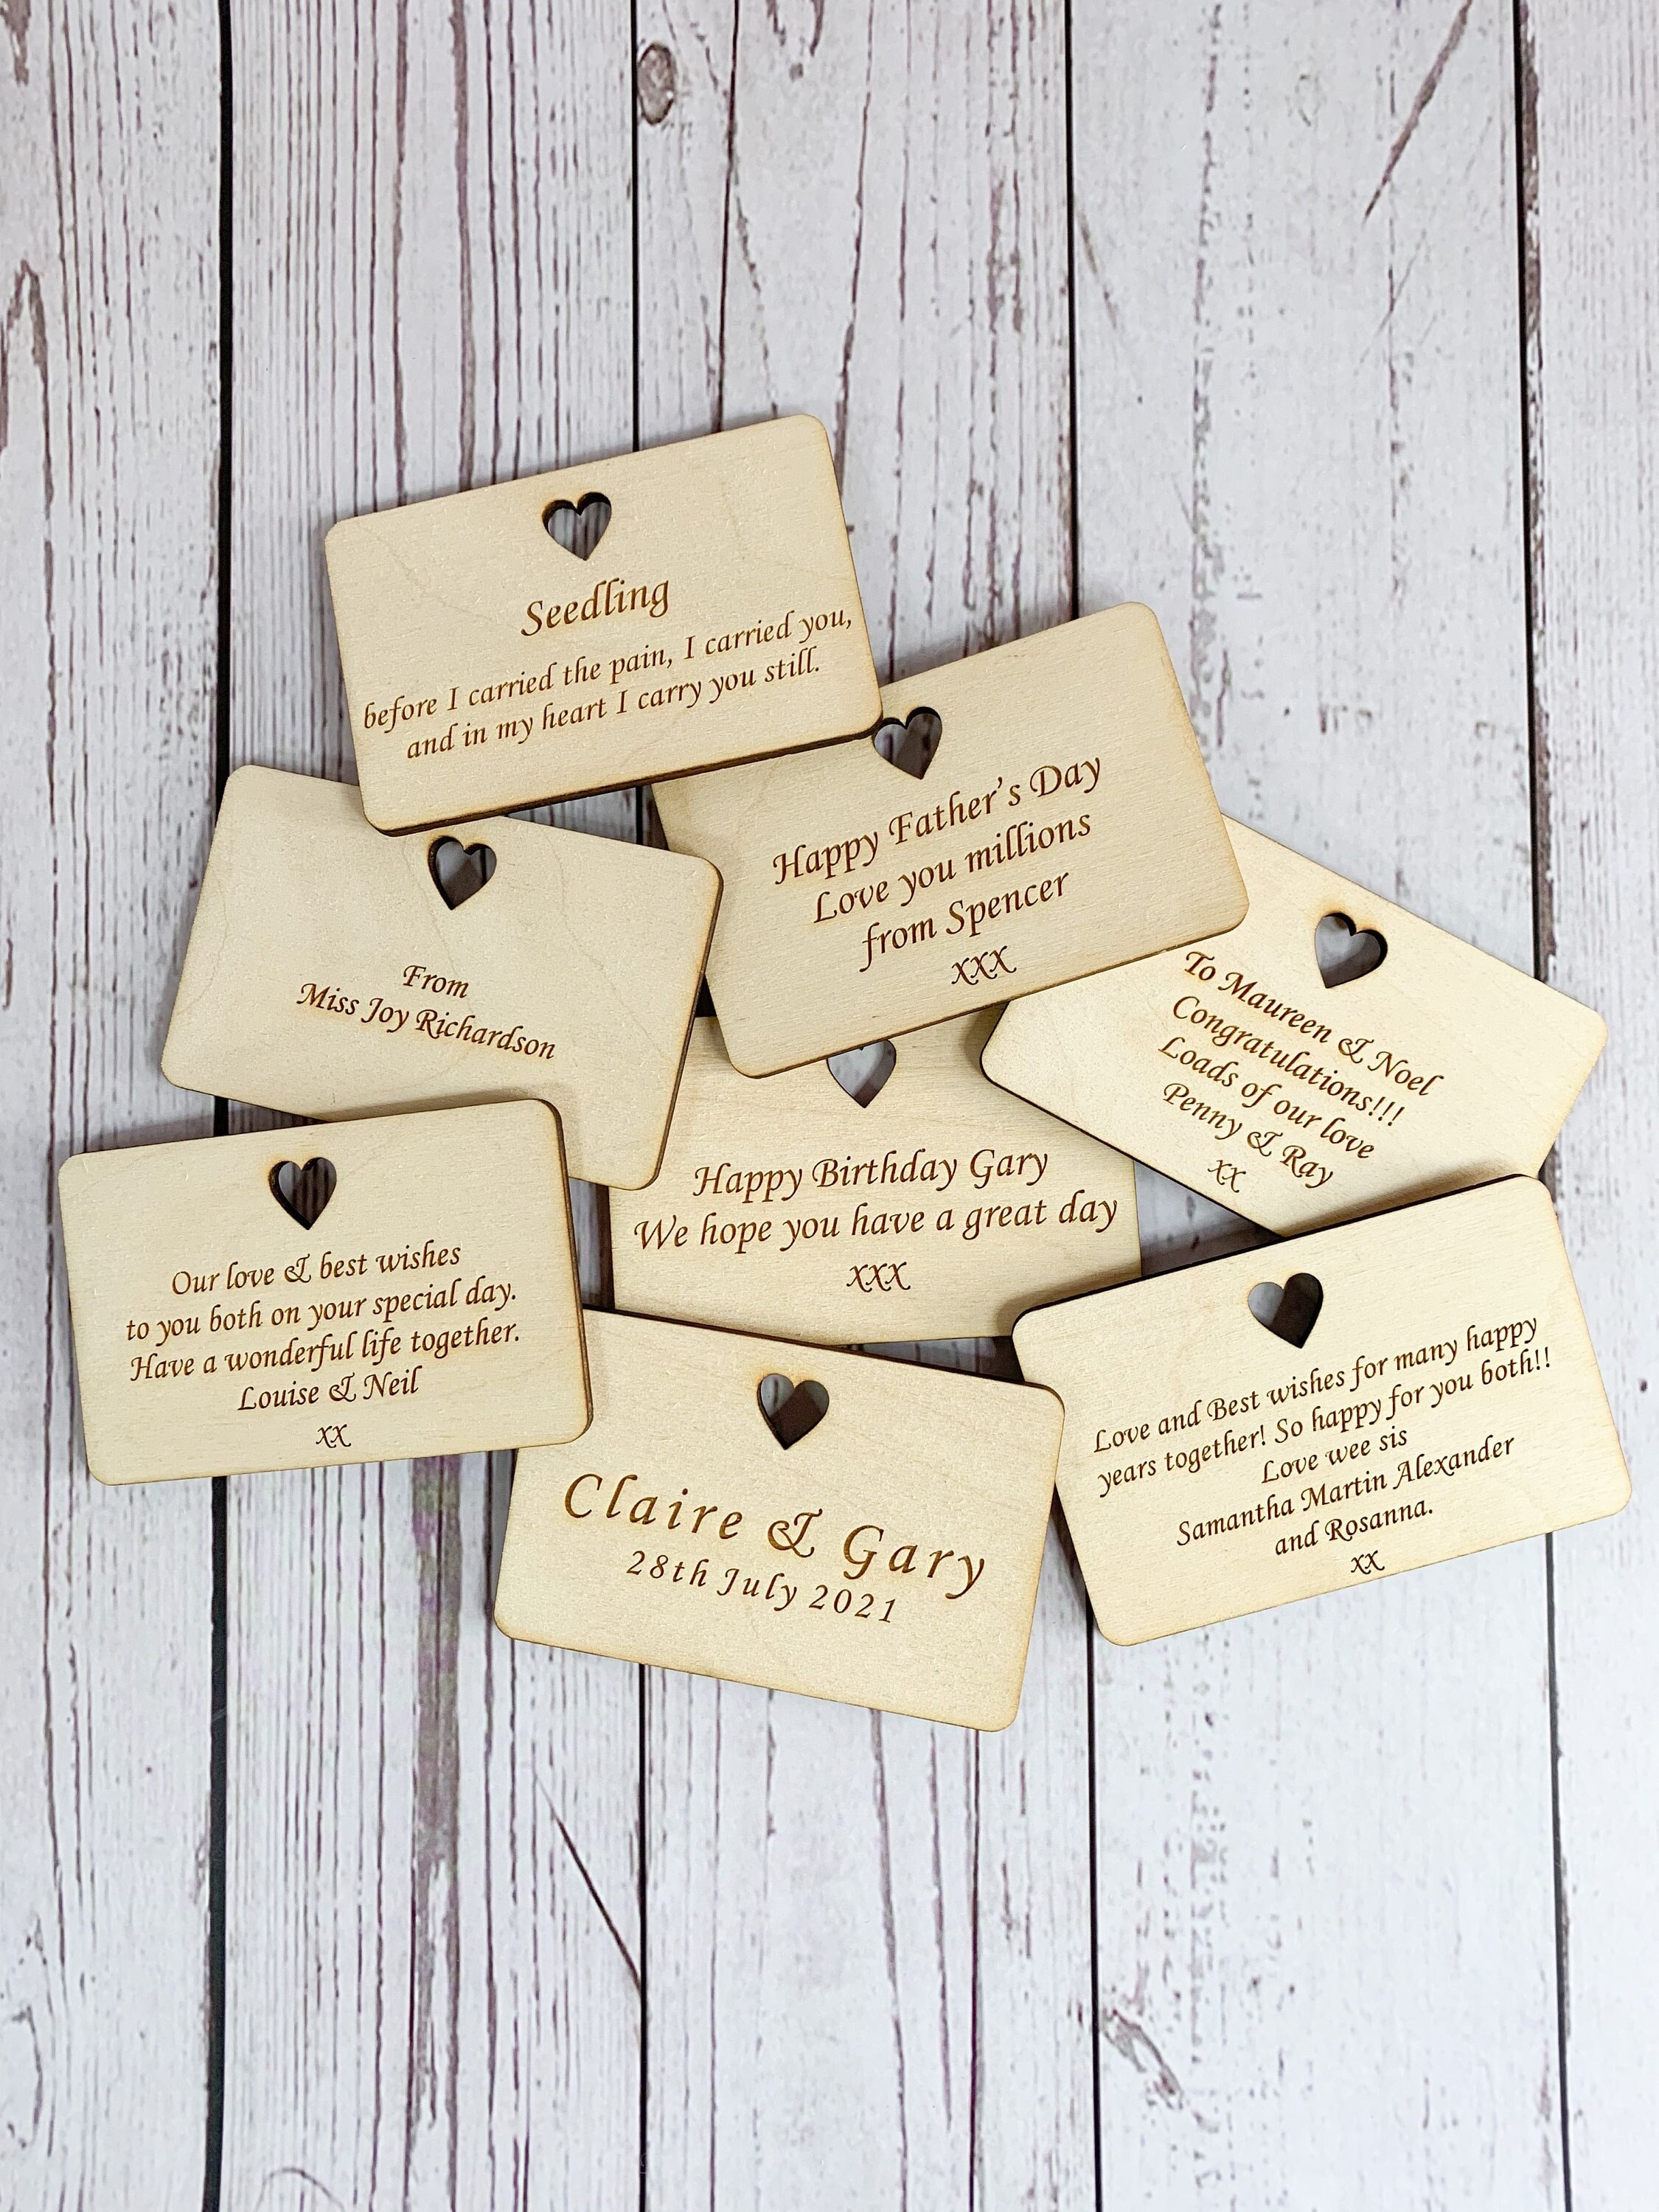 Laser-Engraved Gifts – 5 Great Ideas